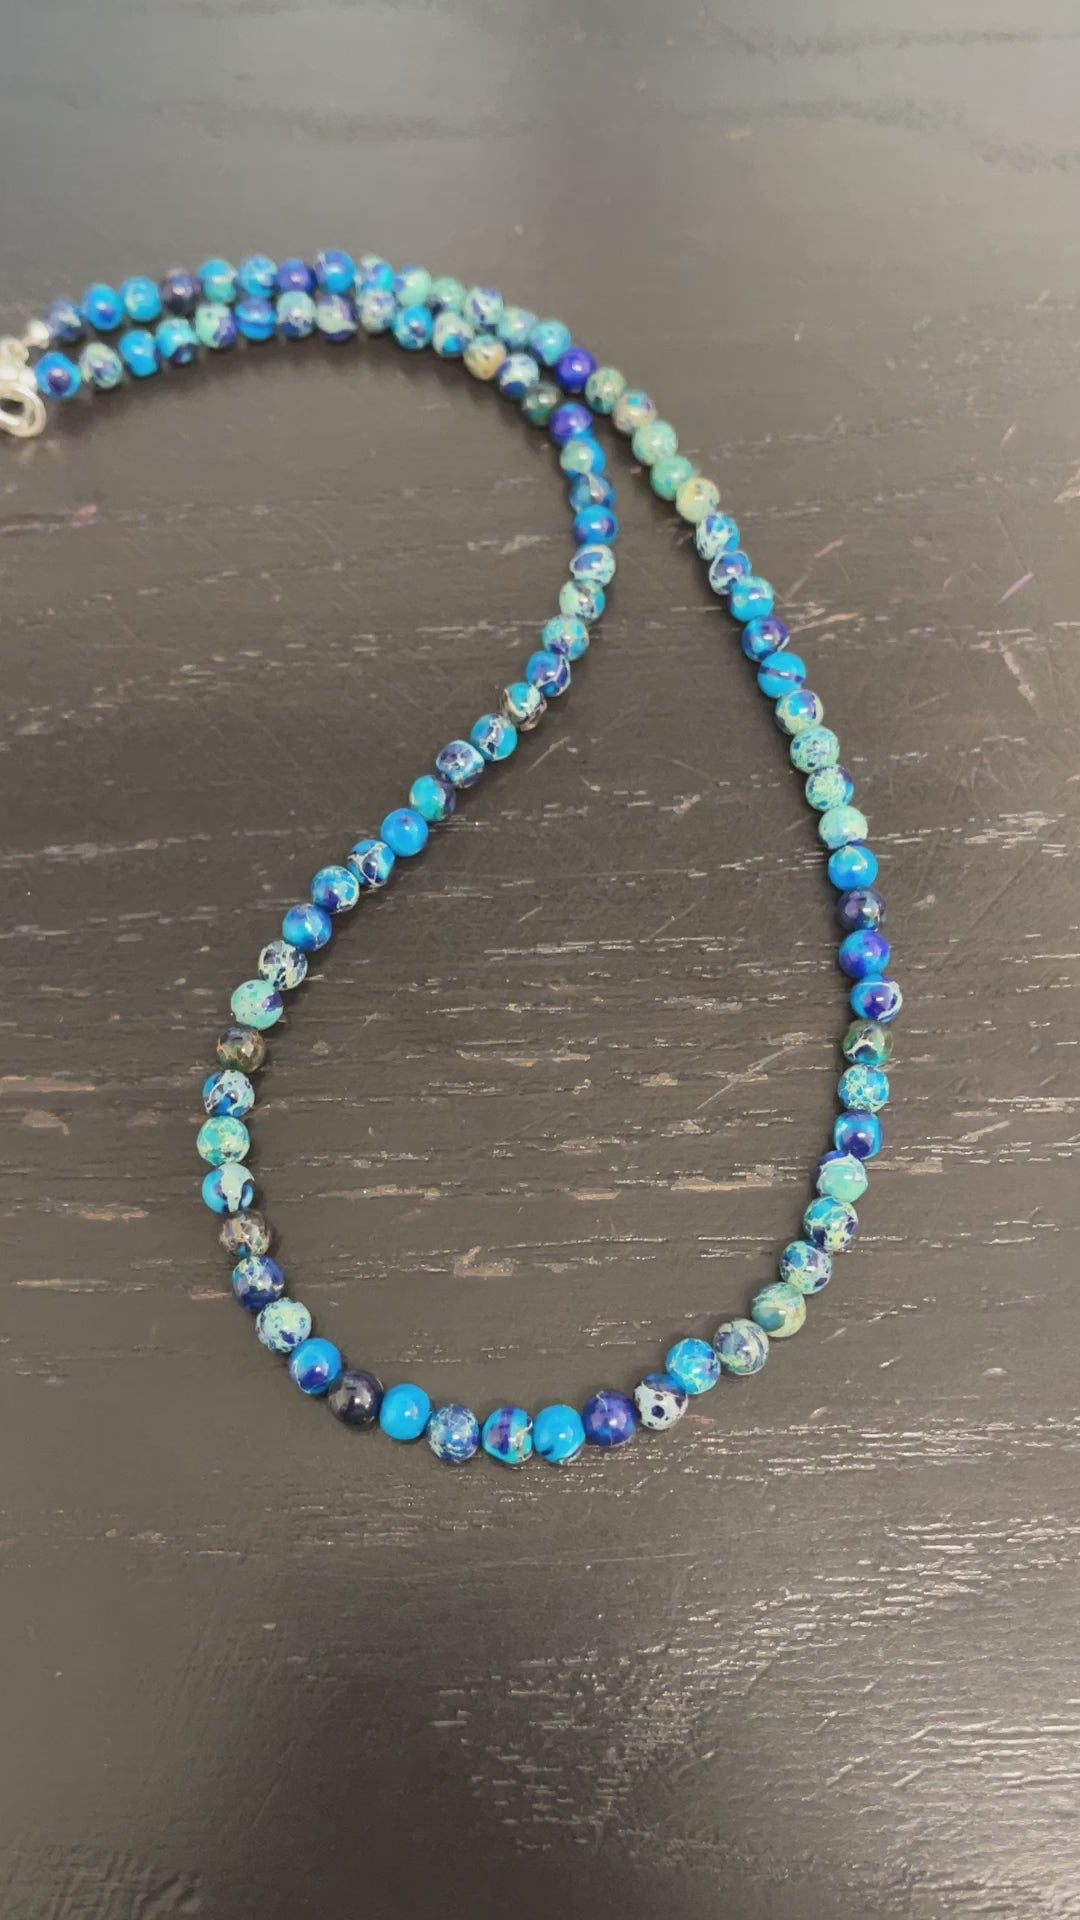 Handcrafted Glass and Crystal Beaded Long Necklace - Multicolor Emotions |  NOVICA